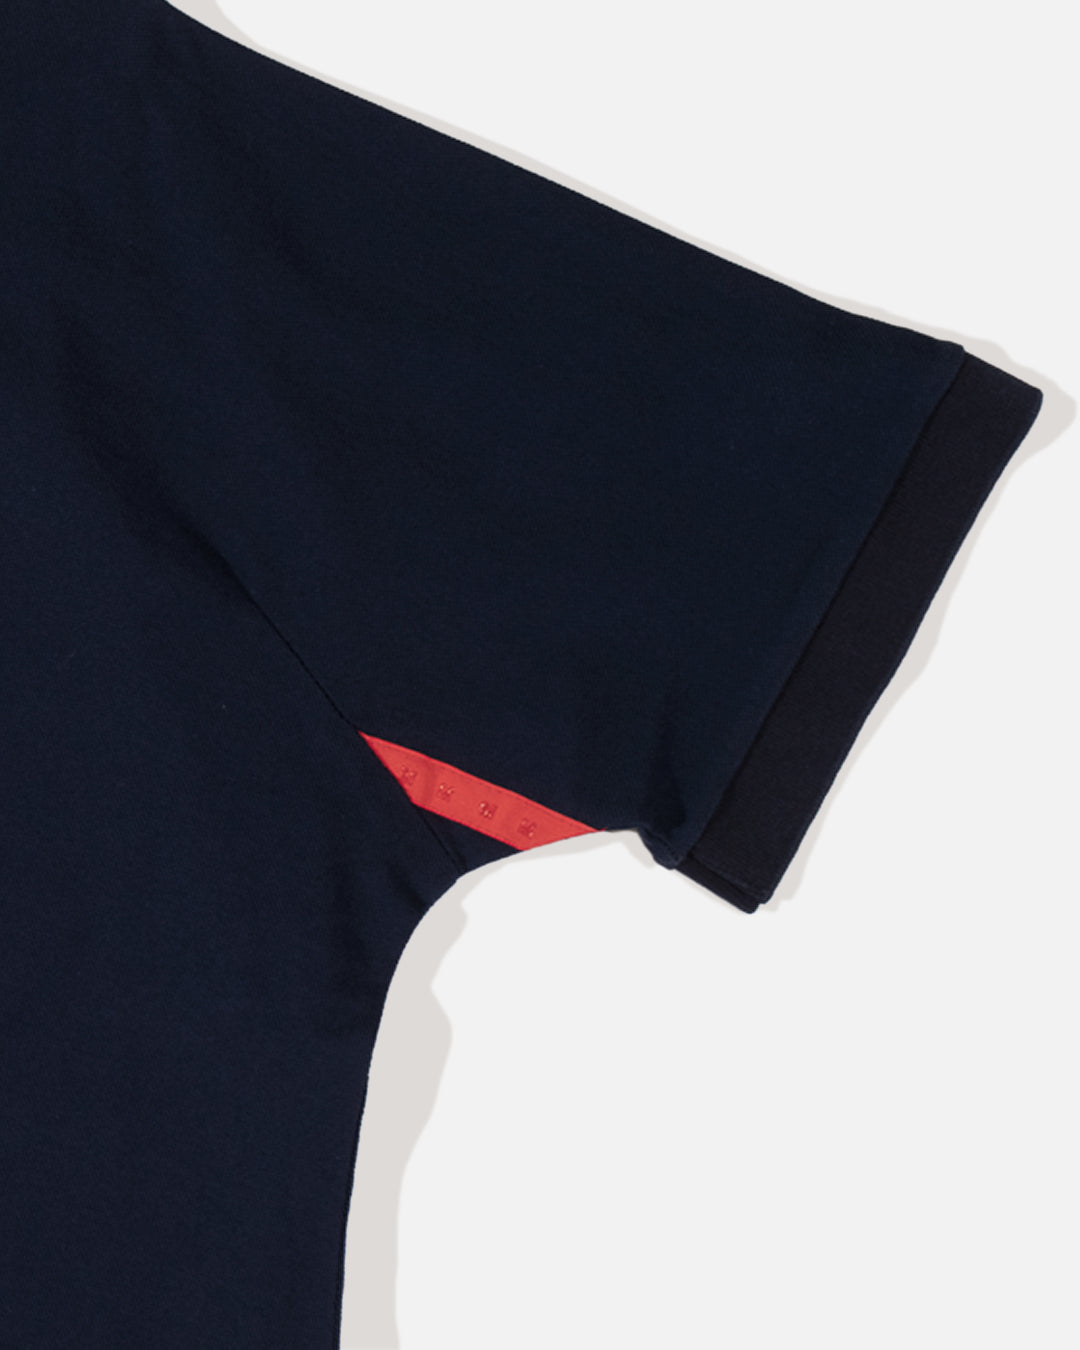 Phingerin Double Polo in Navy | Blues Store